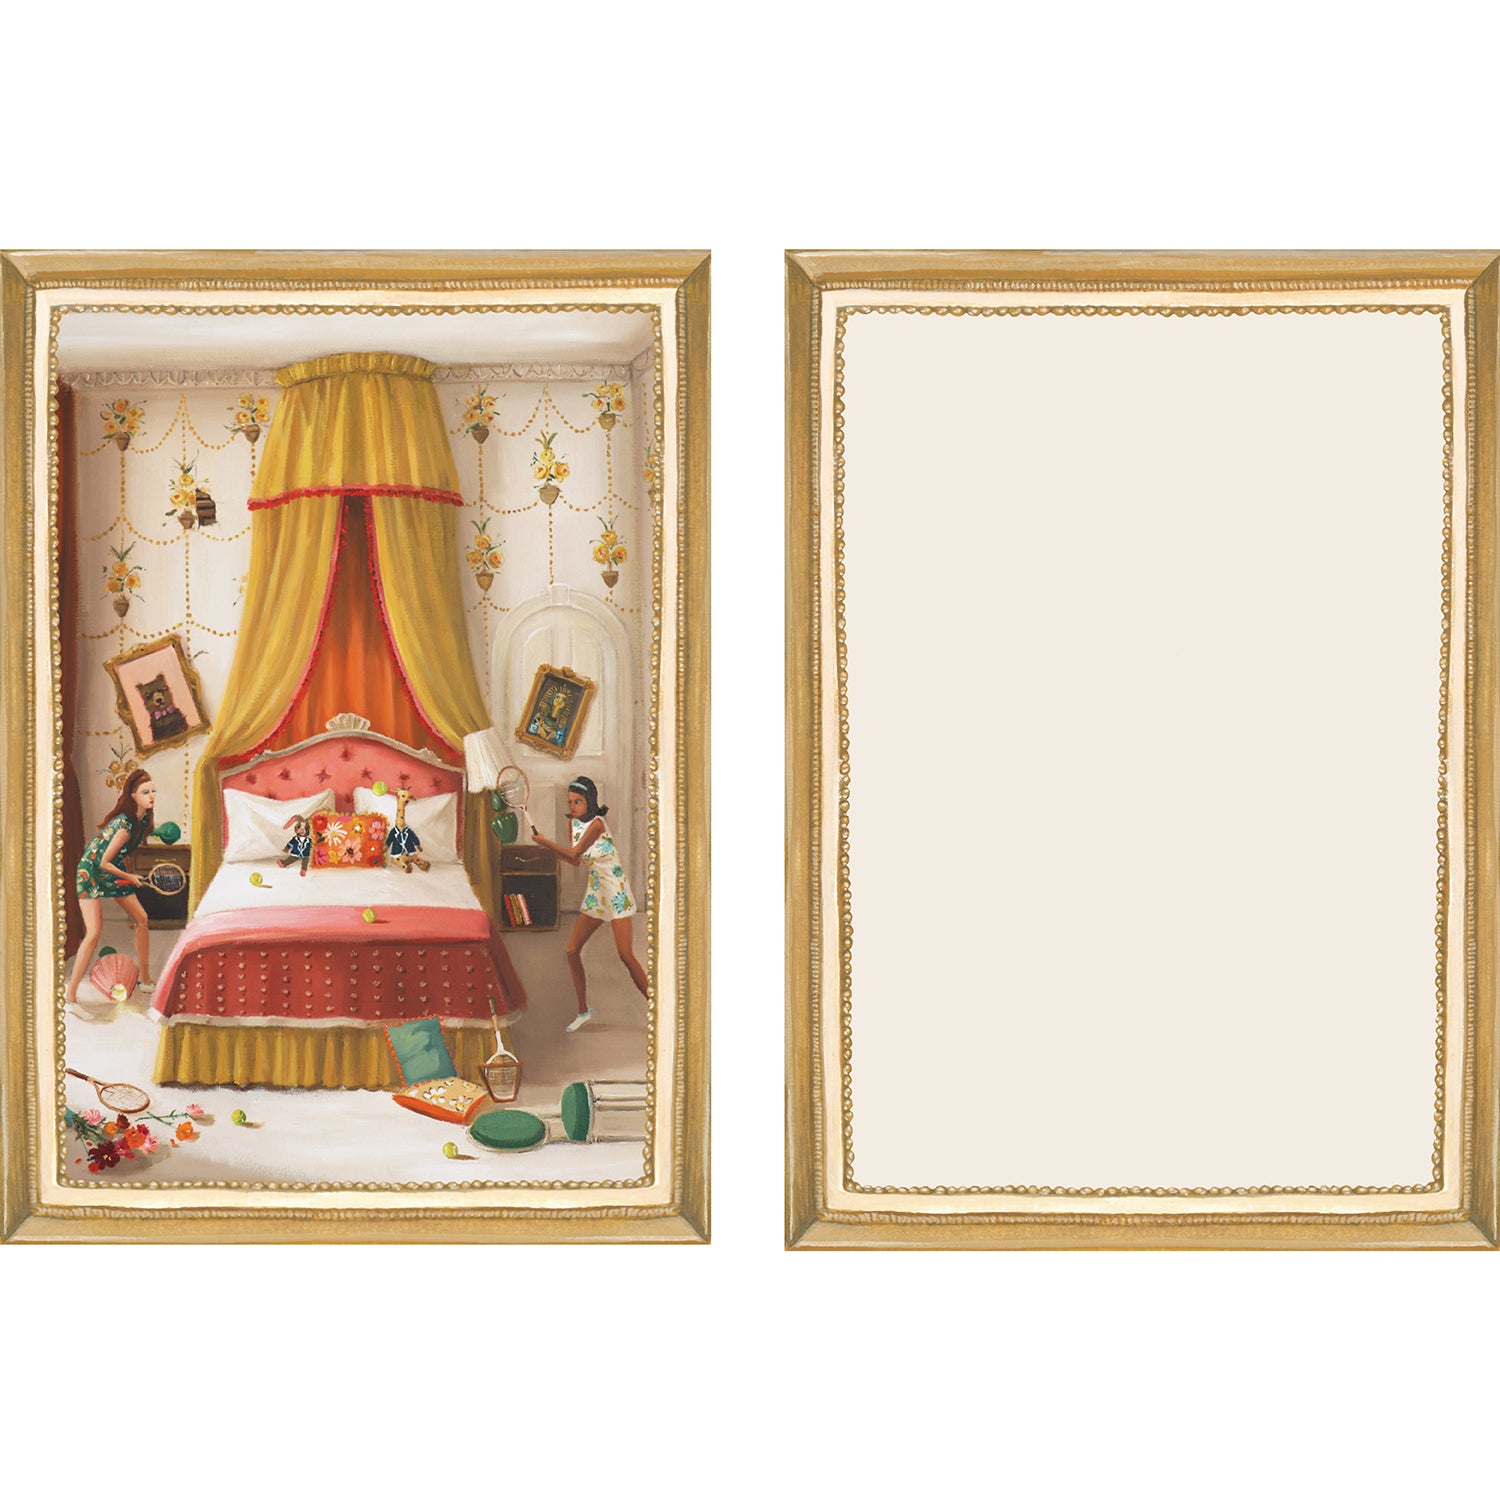 Home Sweet Home Flat Note Boxed Set of 6 Cards